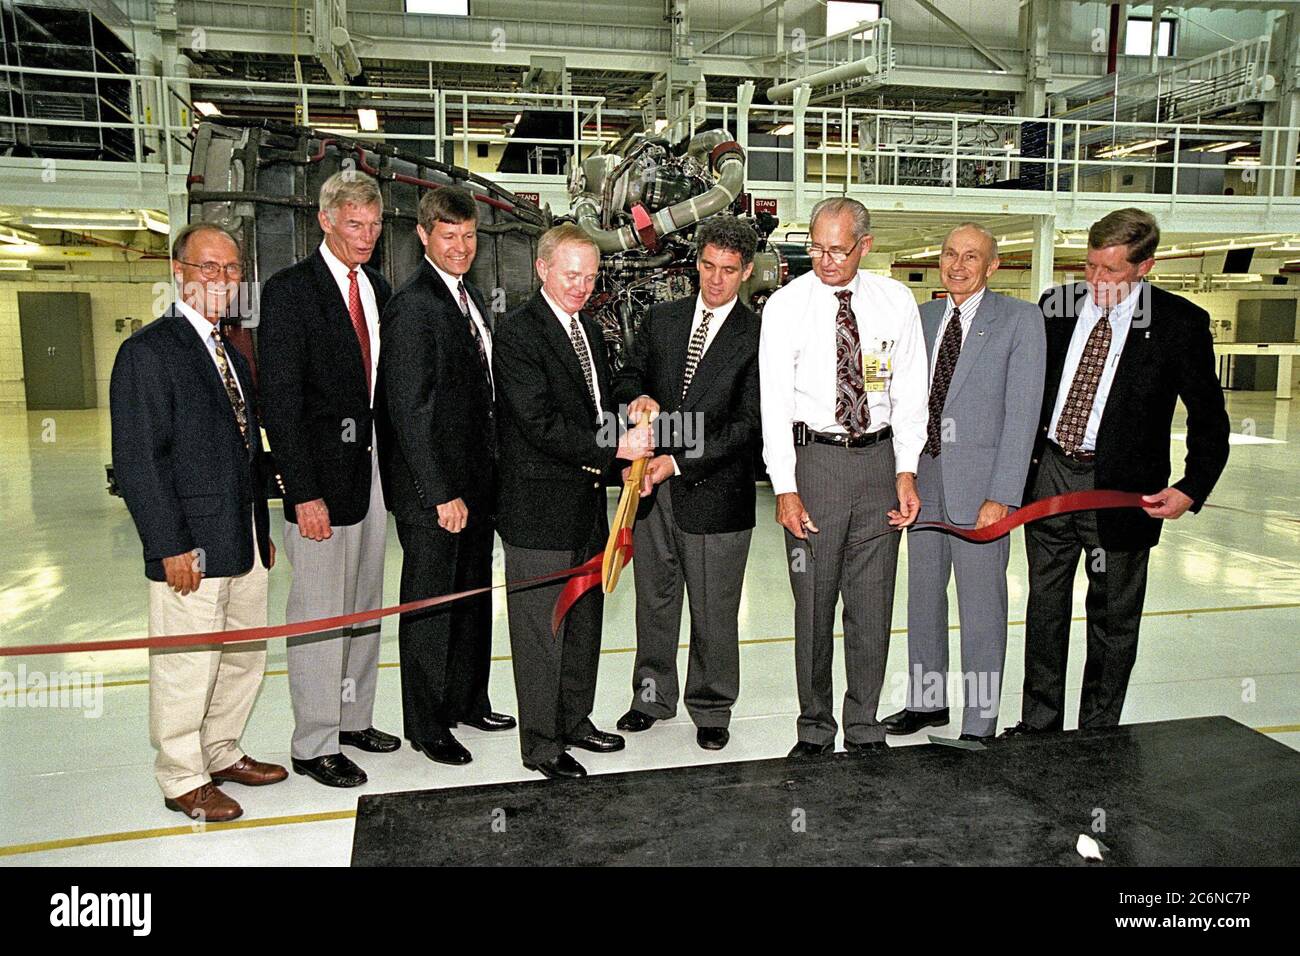 KSC Center Director Roy D. Bridges Jr. and U.S. Congressman Dave Weldon (holding scissors) cut the ribbon at a ceremony on July 6 to open KSC's new 34,600-square-foot Space Shuttle Main Engine Processing Facility (SSMEPF). Joining in the ribbon cutting are (left) Ed Adamek, vice president and associate program manager for Ground Operations of United Space Alliance; Marvin L. Jones, director of Installation Operations; Donald R. McMonagle, manager of Launch Integration; (right) Wade Ivey of Ivey Construction, Inc.; Robert B. Sieck, director of Shuttle Processing; and John Plowden, vice presiden Stock Photo